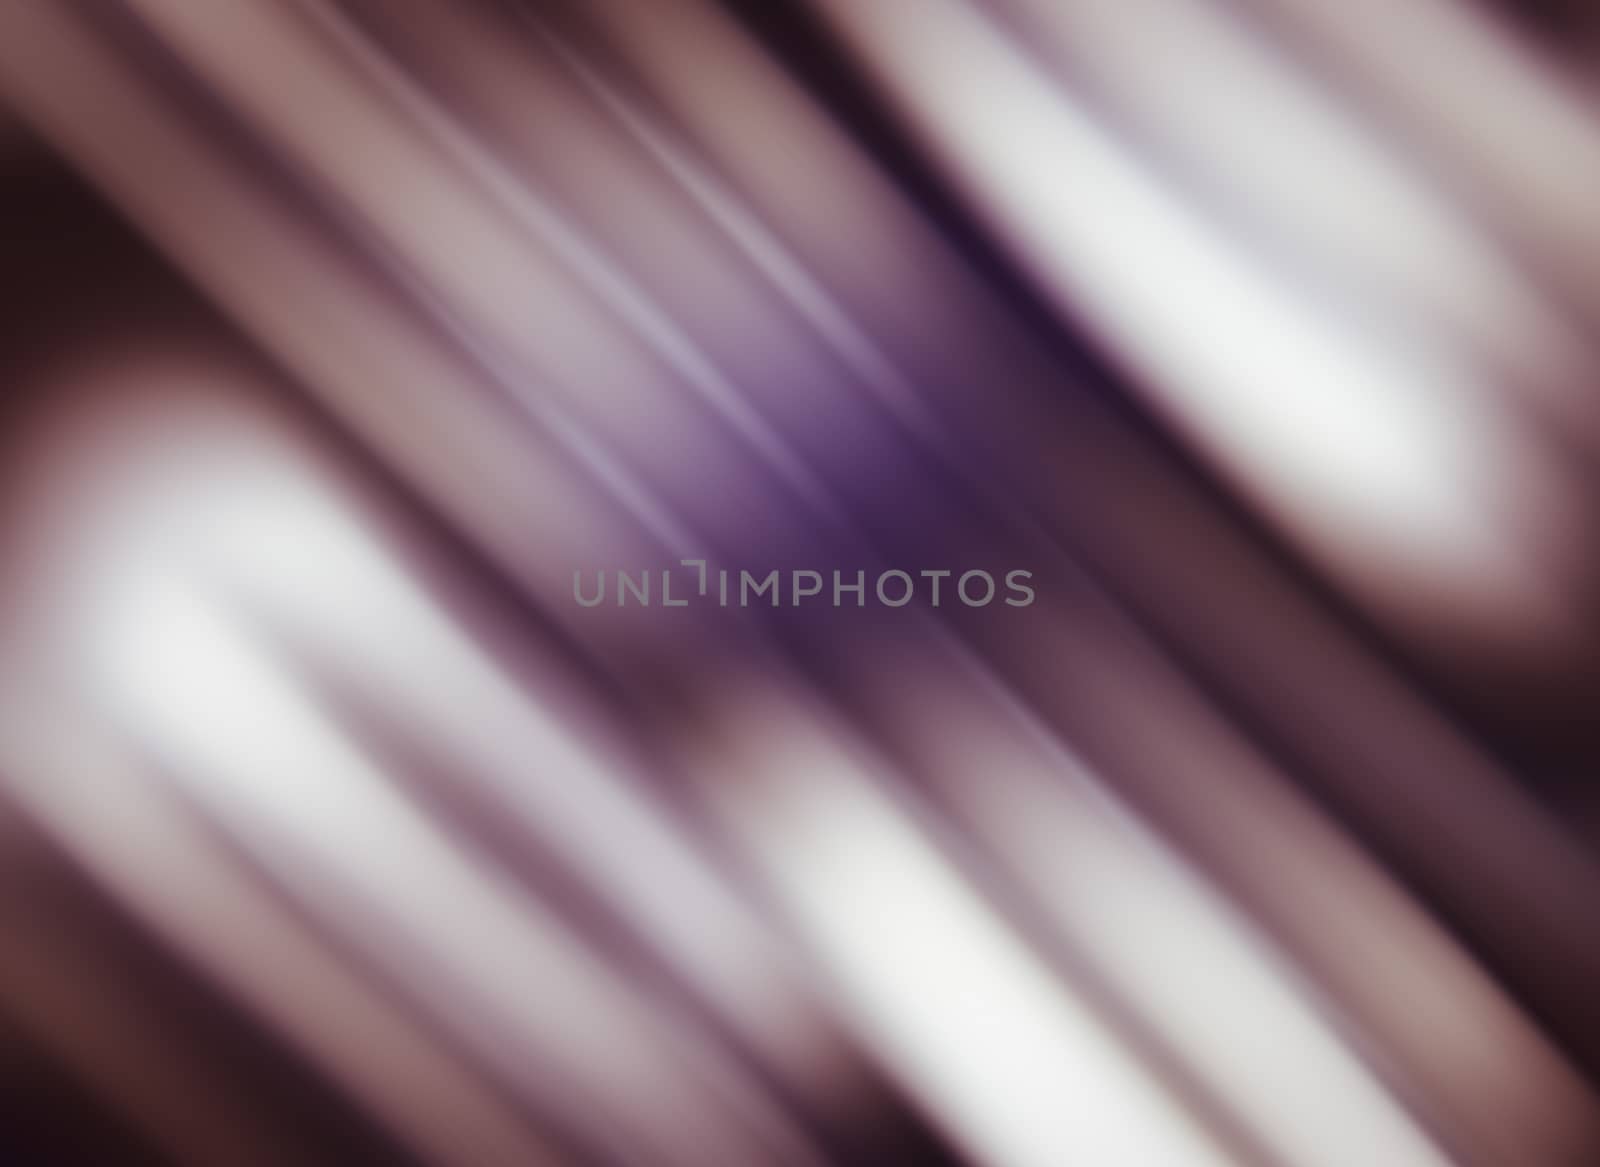 abstract blurred inclined background or textile